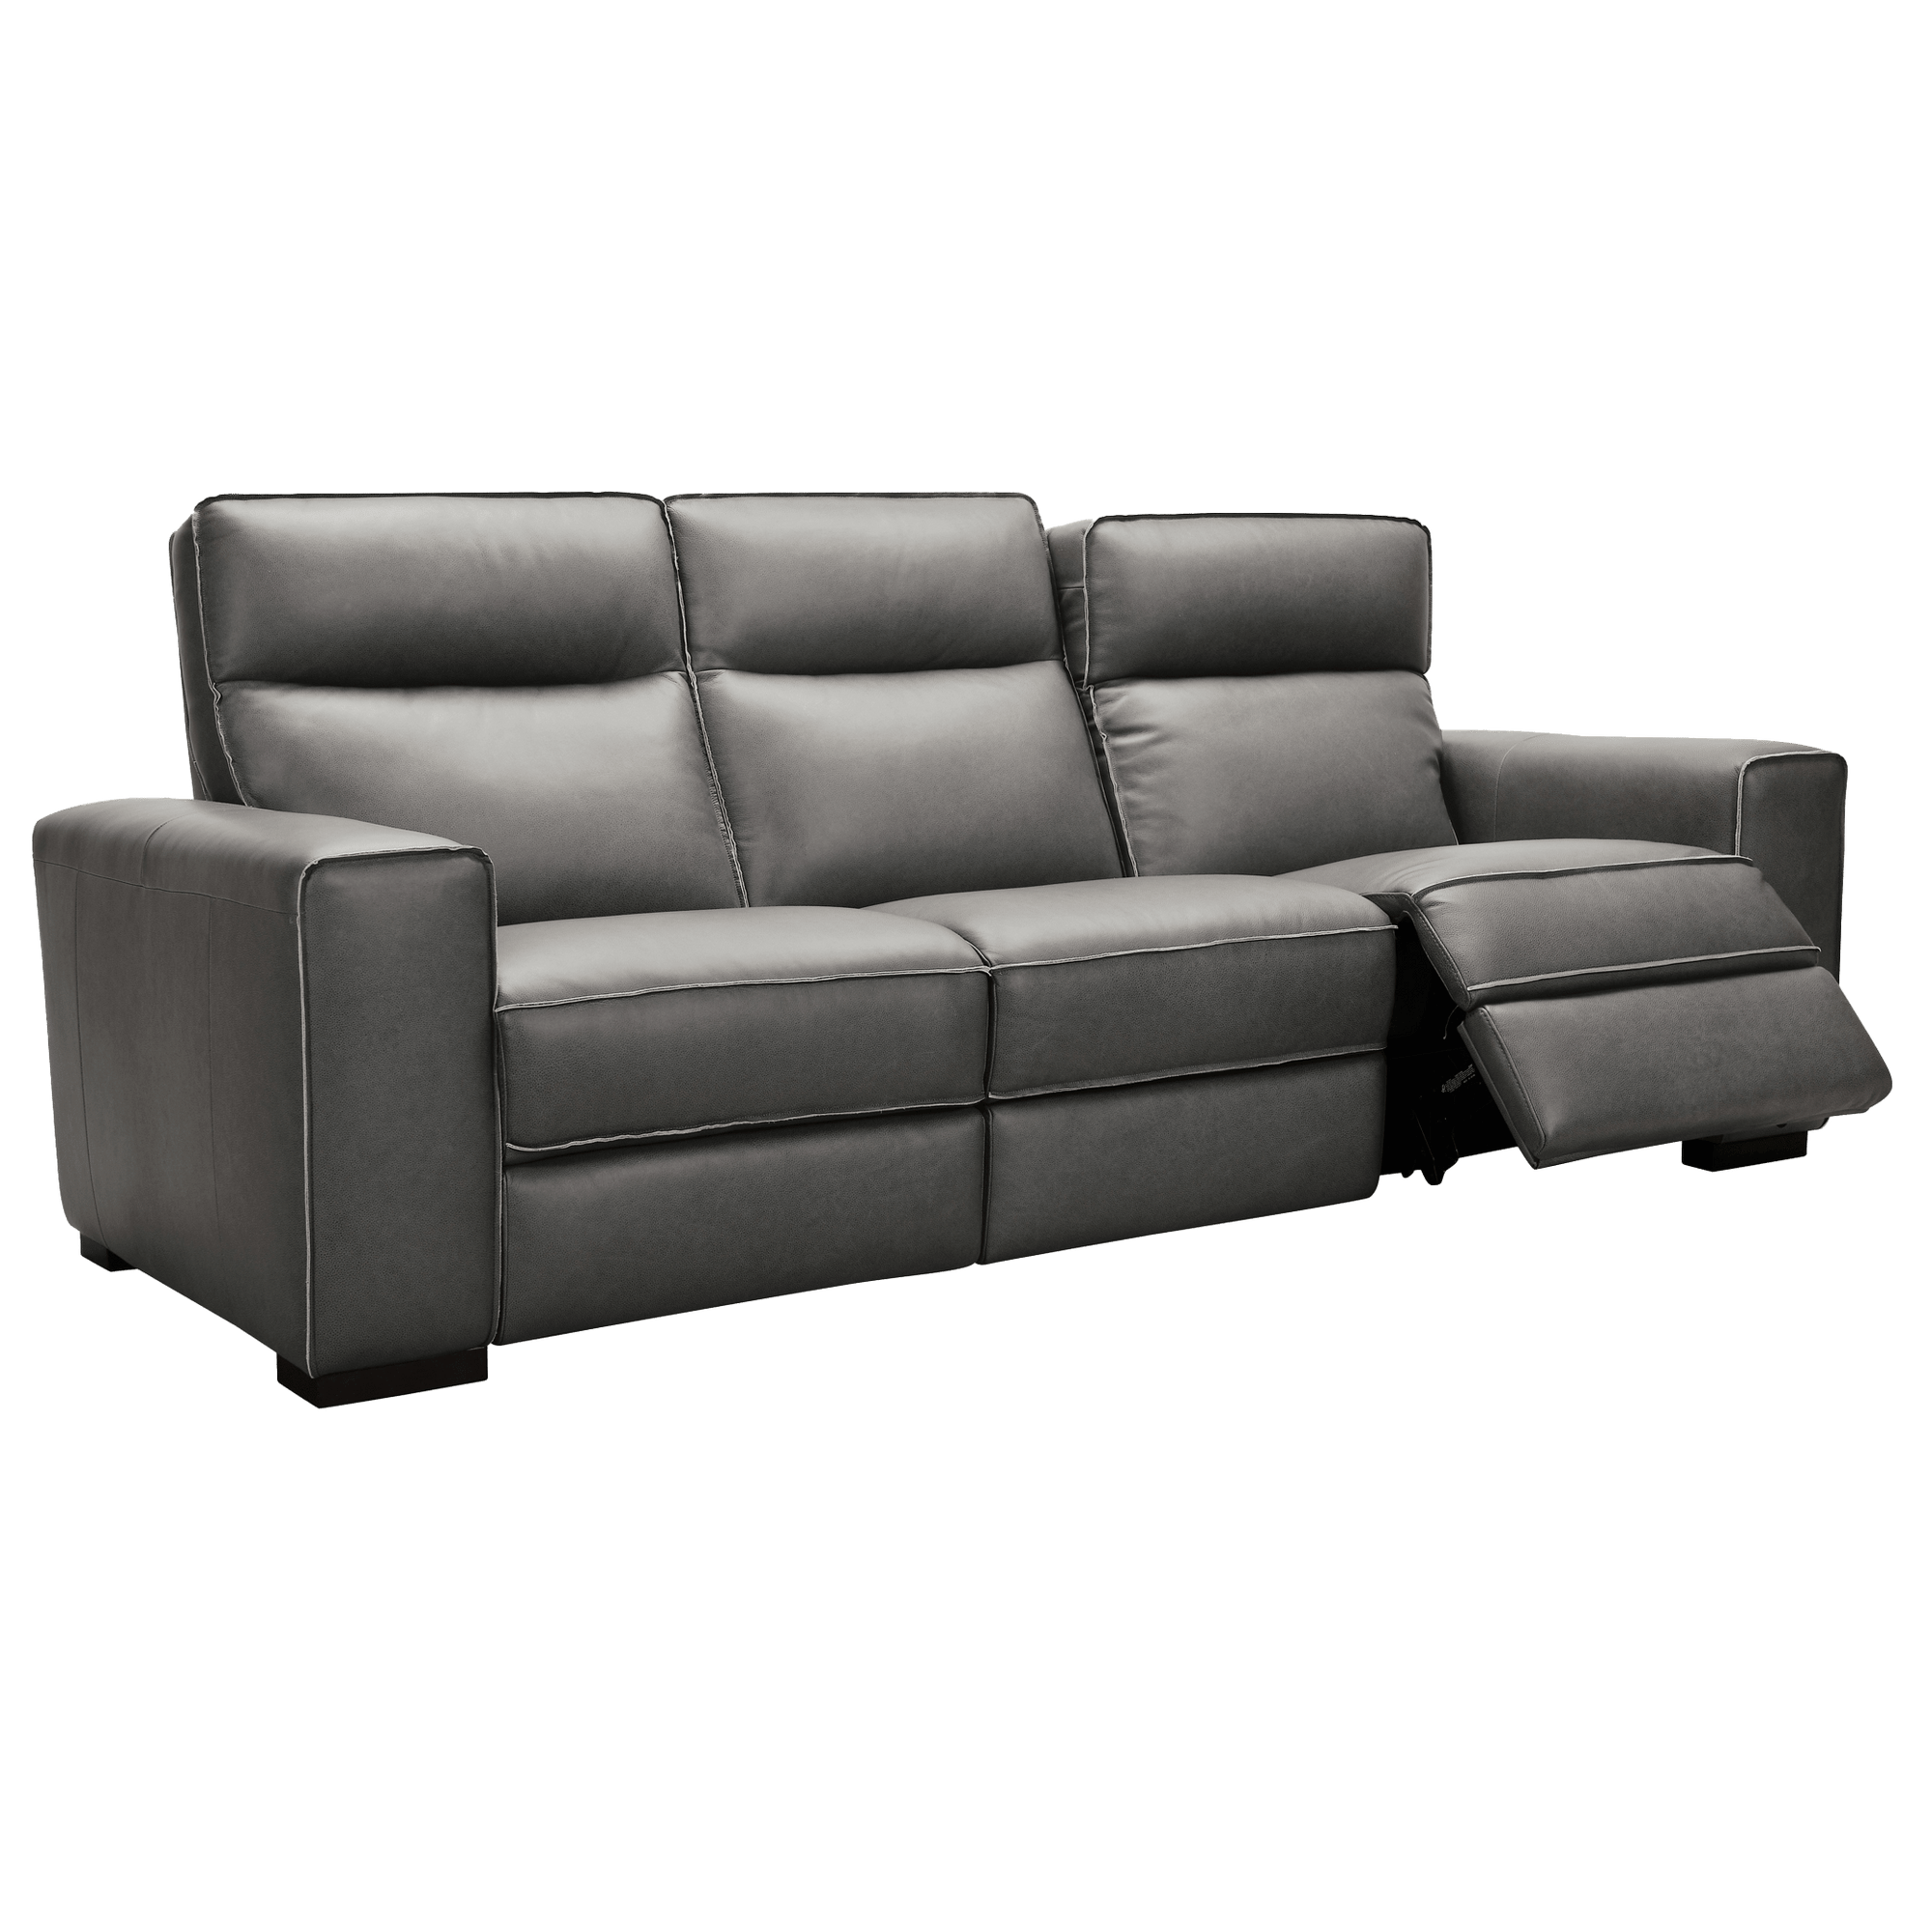 Baxlee Power Reclining Sofa with Articulating Headrest, Leather